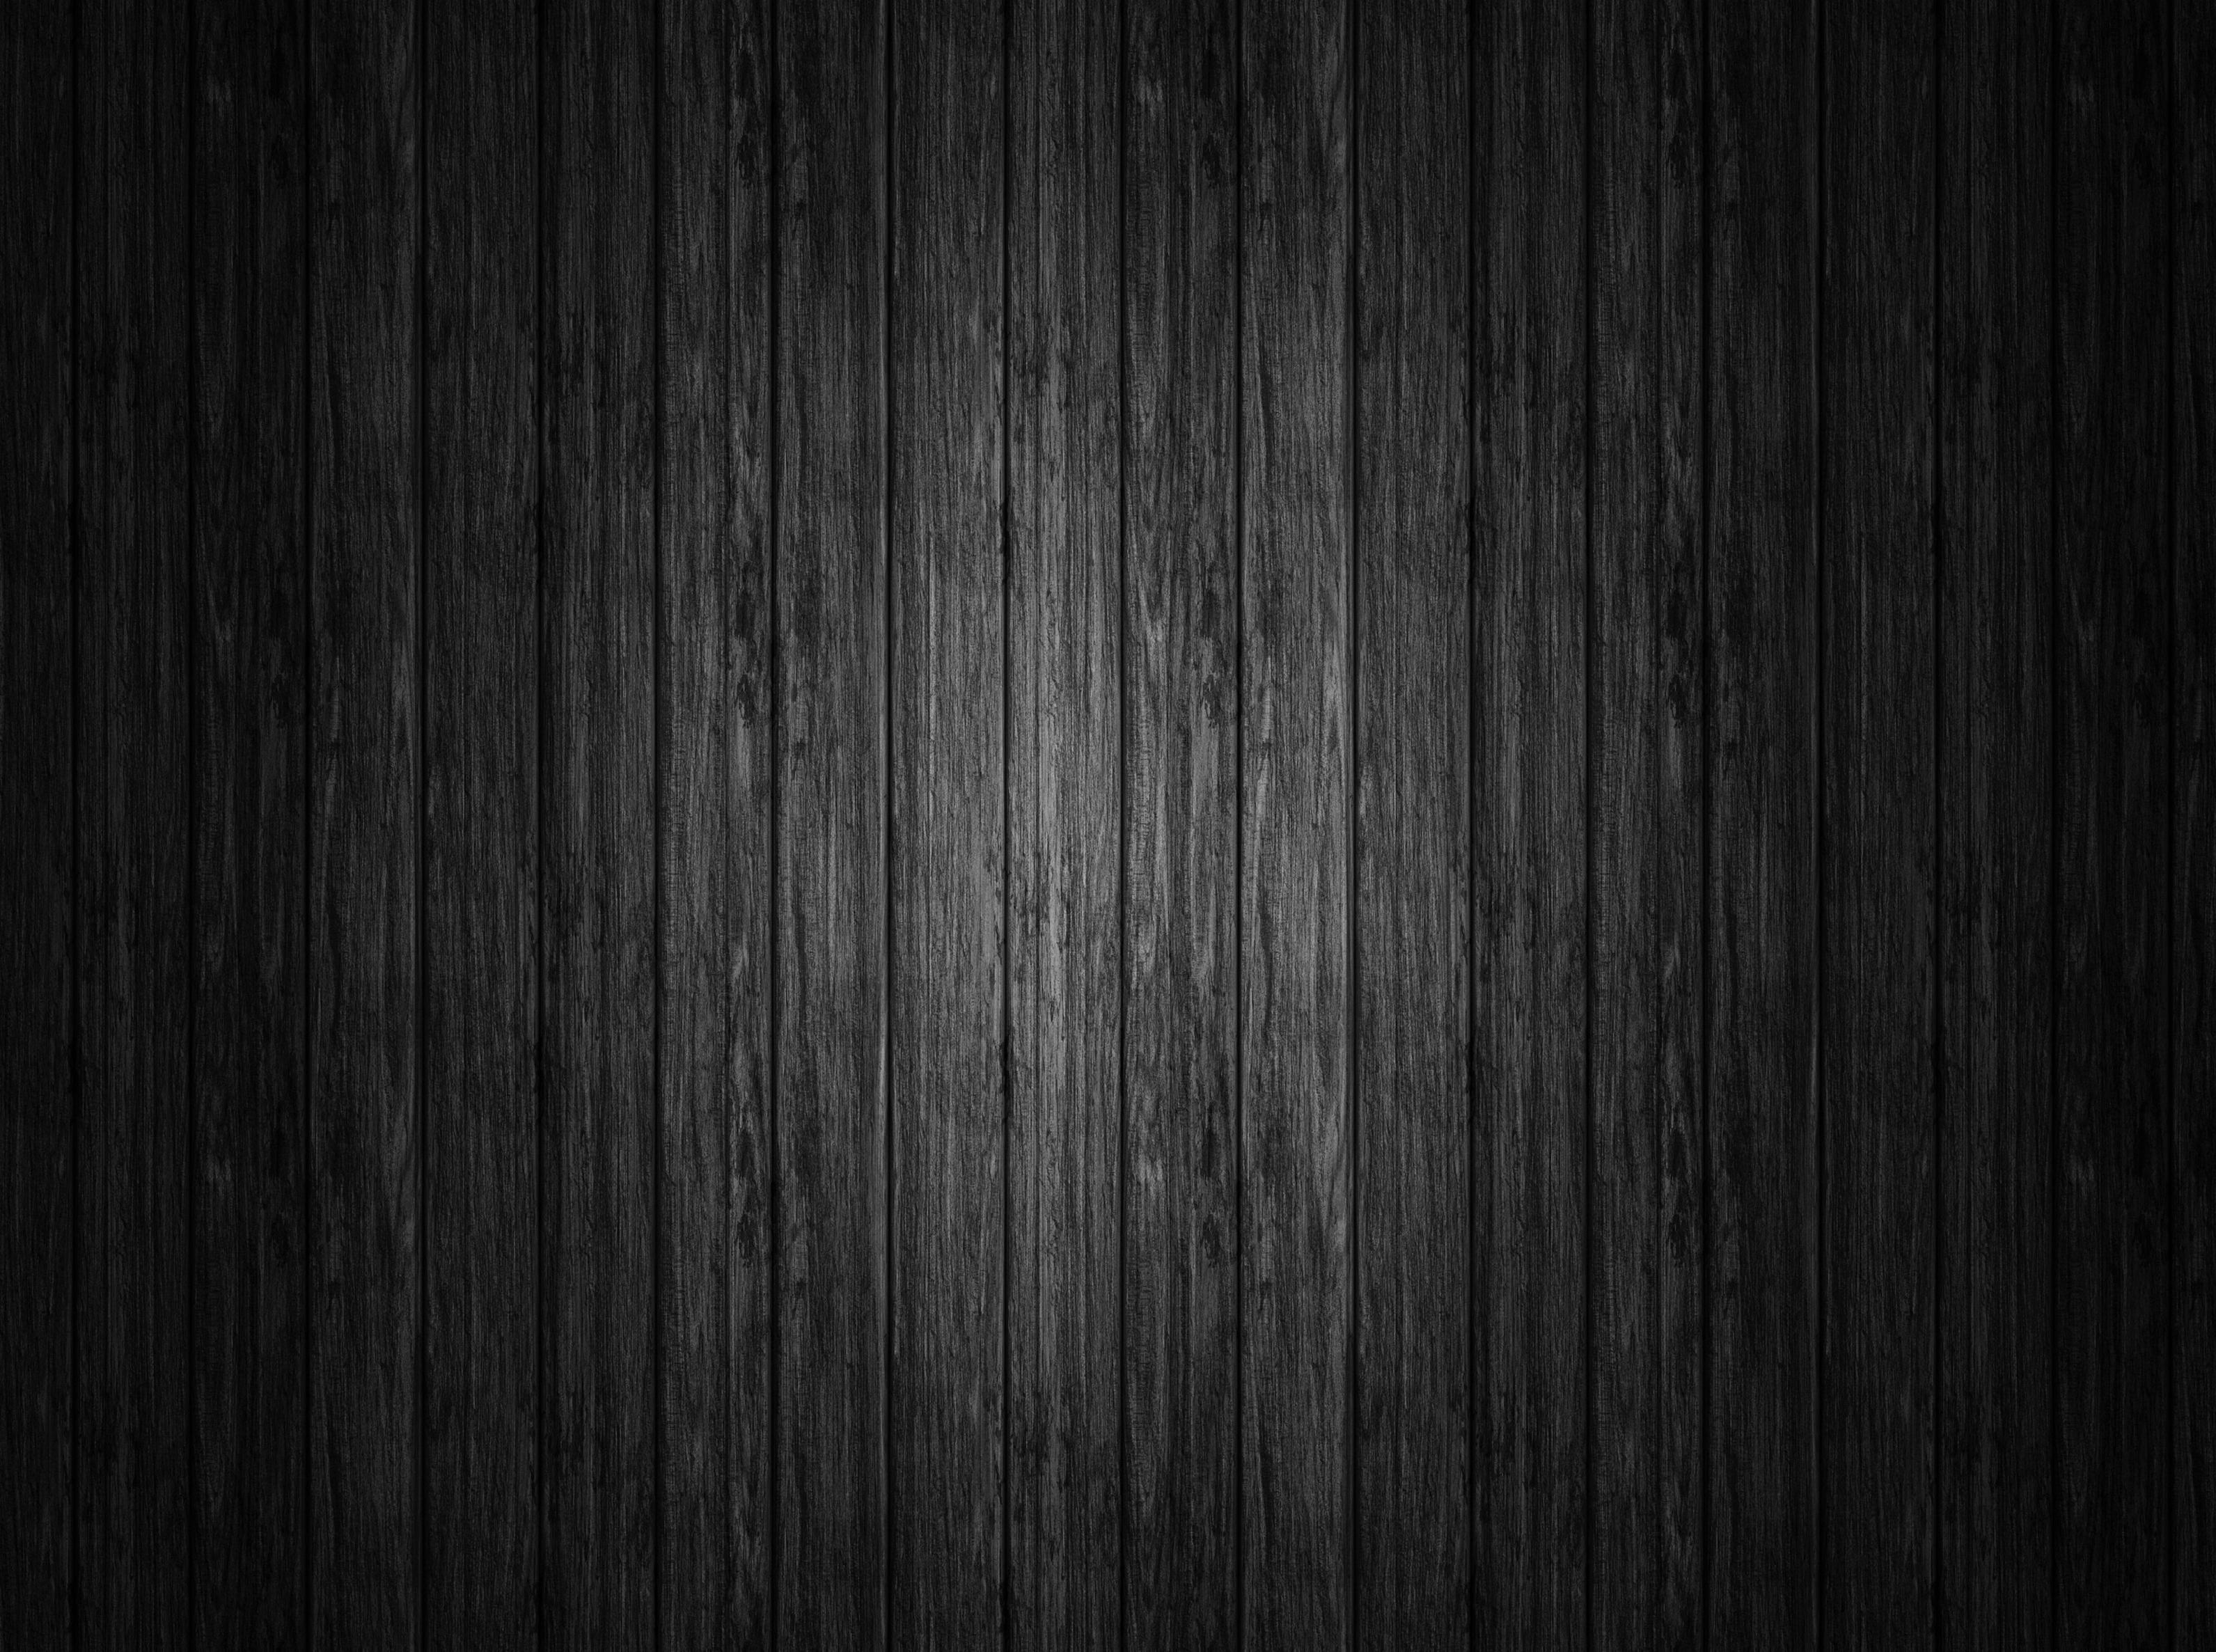 Download 10 Solid Color iPhone Wallpapers: Black, White, Grey, Red, Blue  And More - iOS Hacker